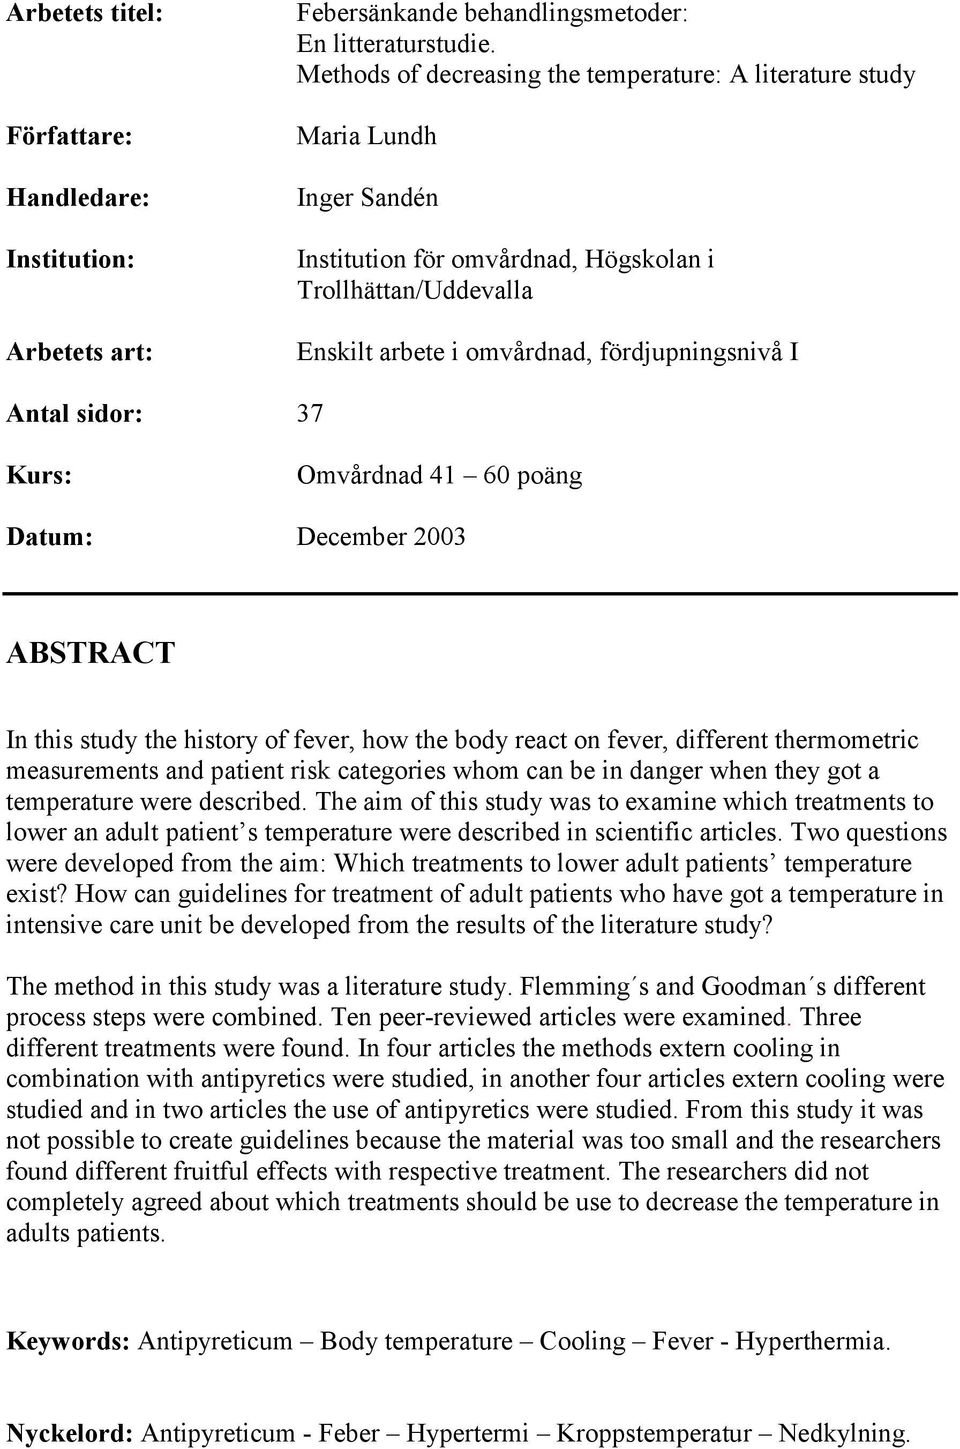 sidor: 37 Kurs: Omvårdnad 41 60 poäng Datum: December 2003 ABSTRACT In this study the history of fever, how the body react on fever, different thermometric measurements and patient risk categories